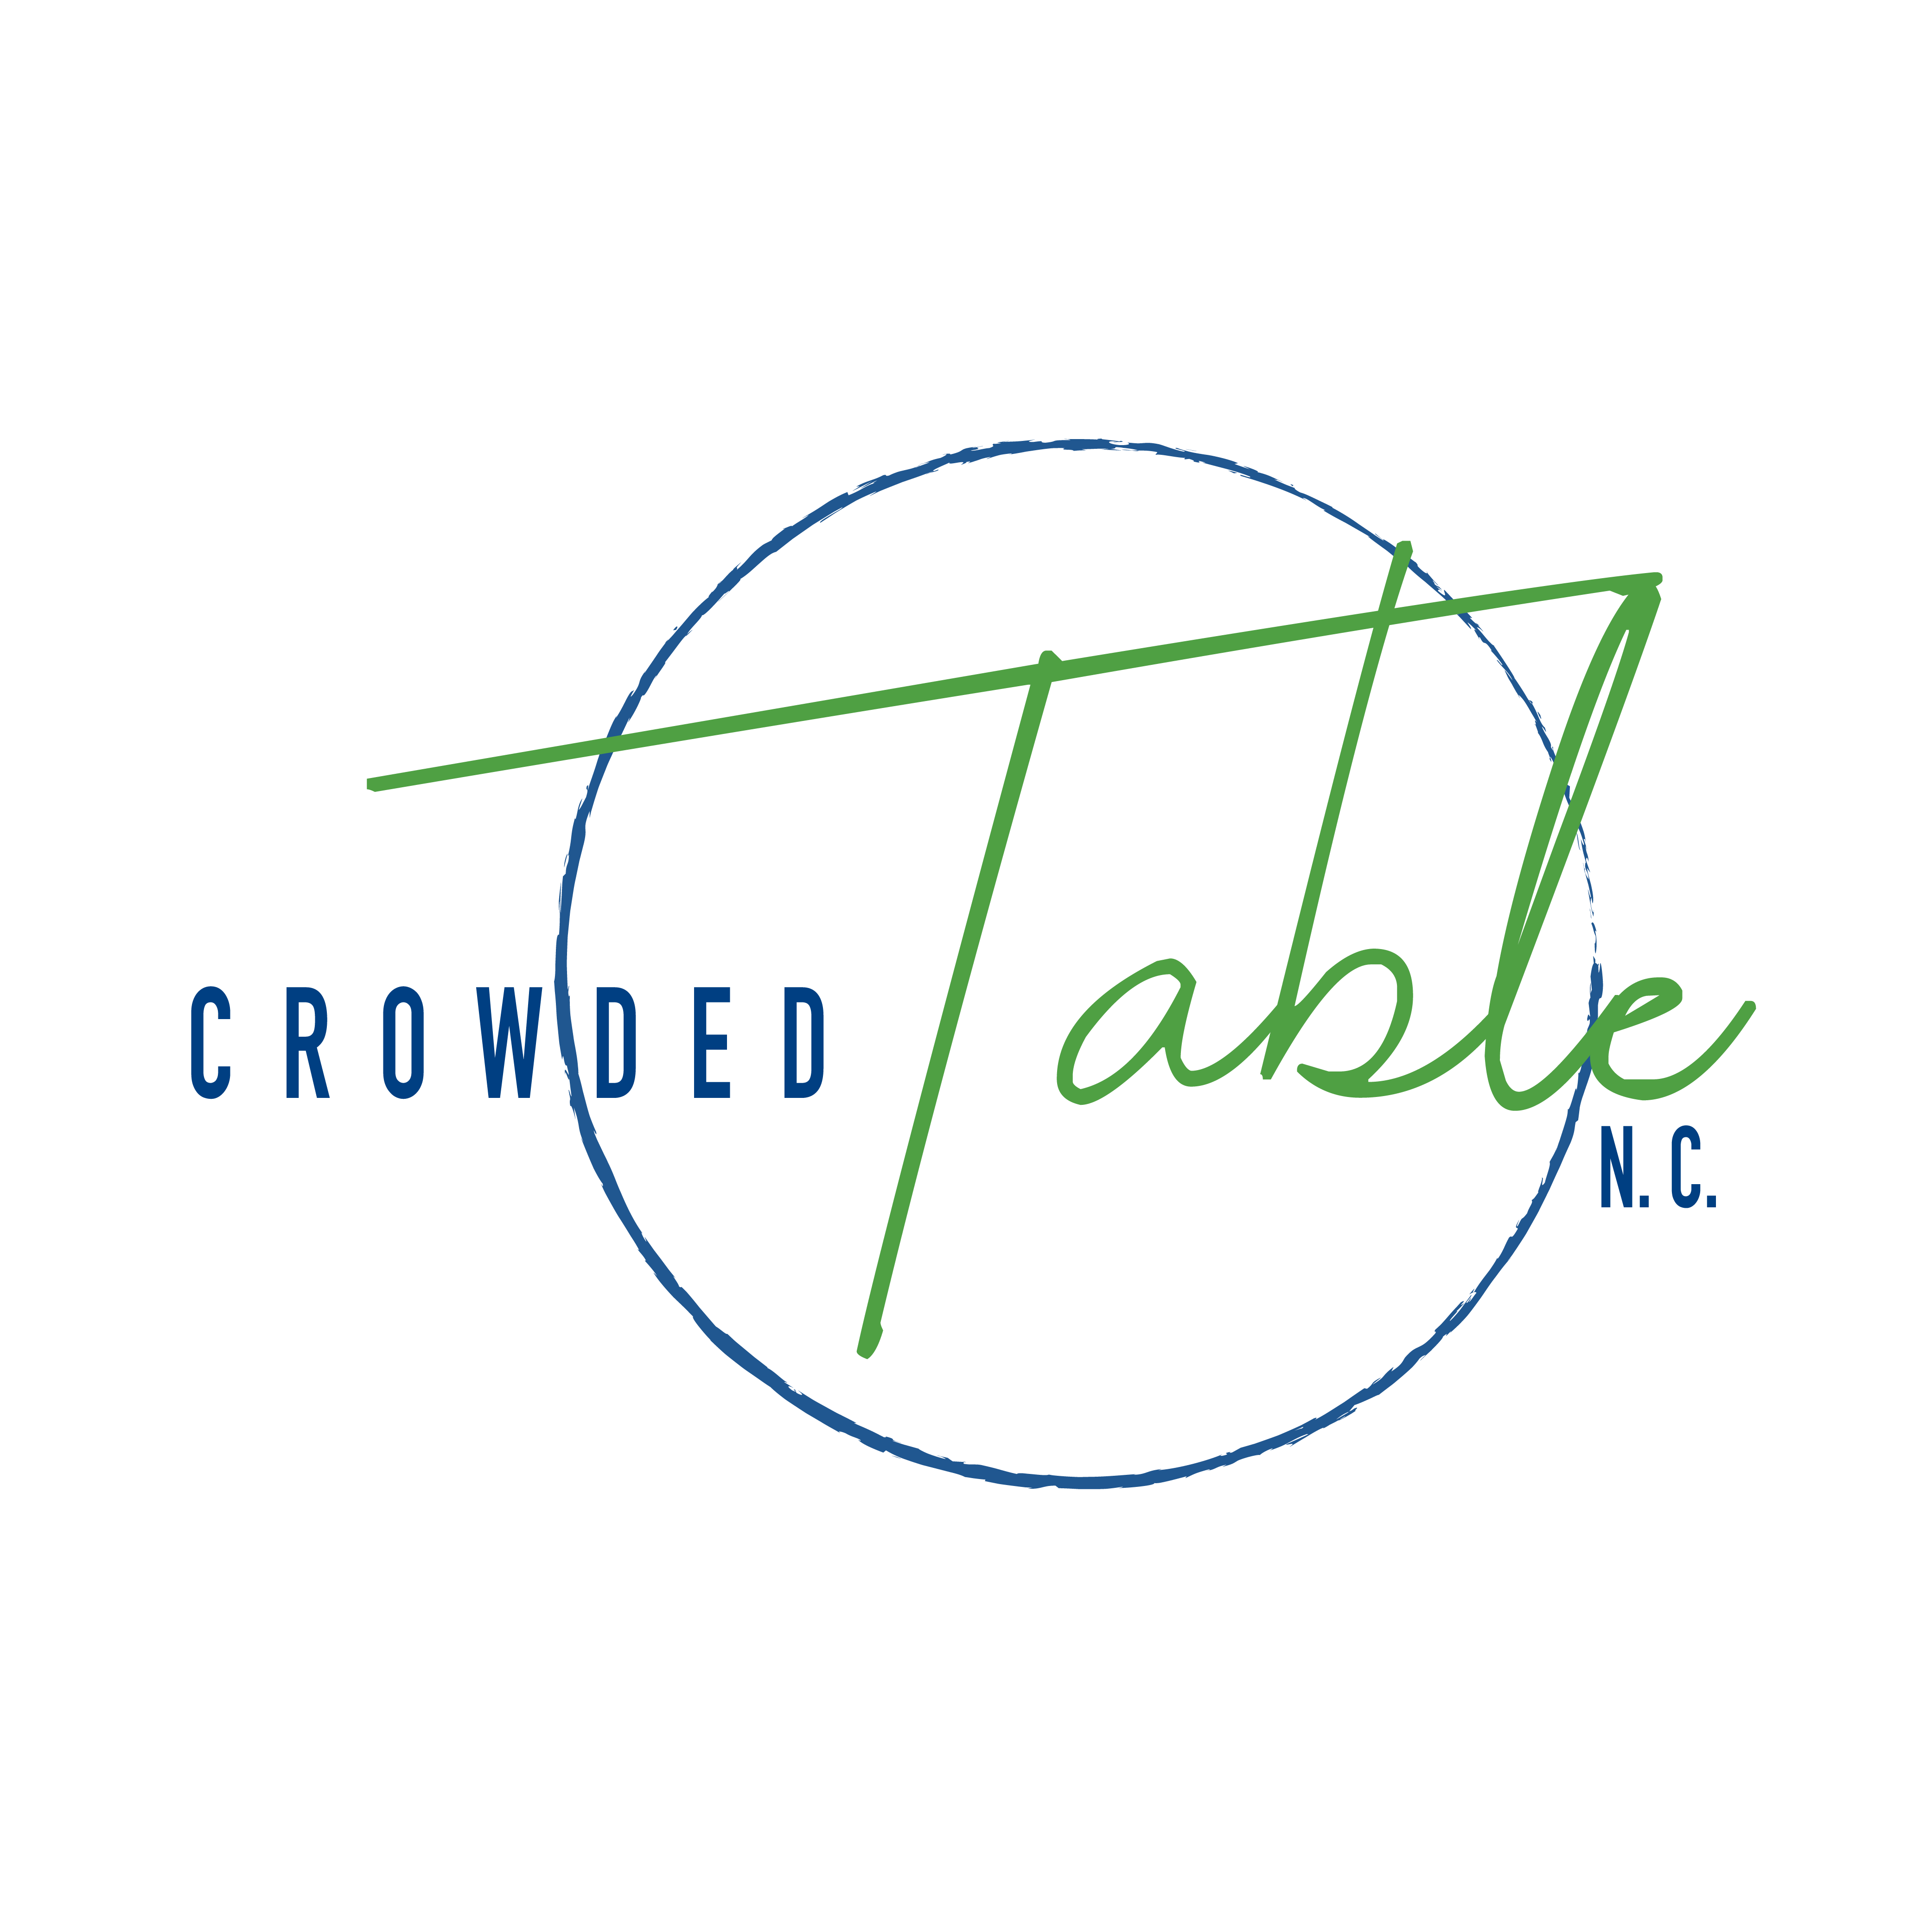 Crowded Table NC